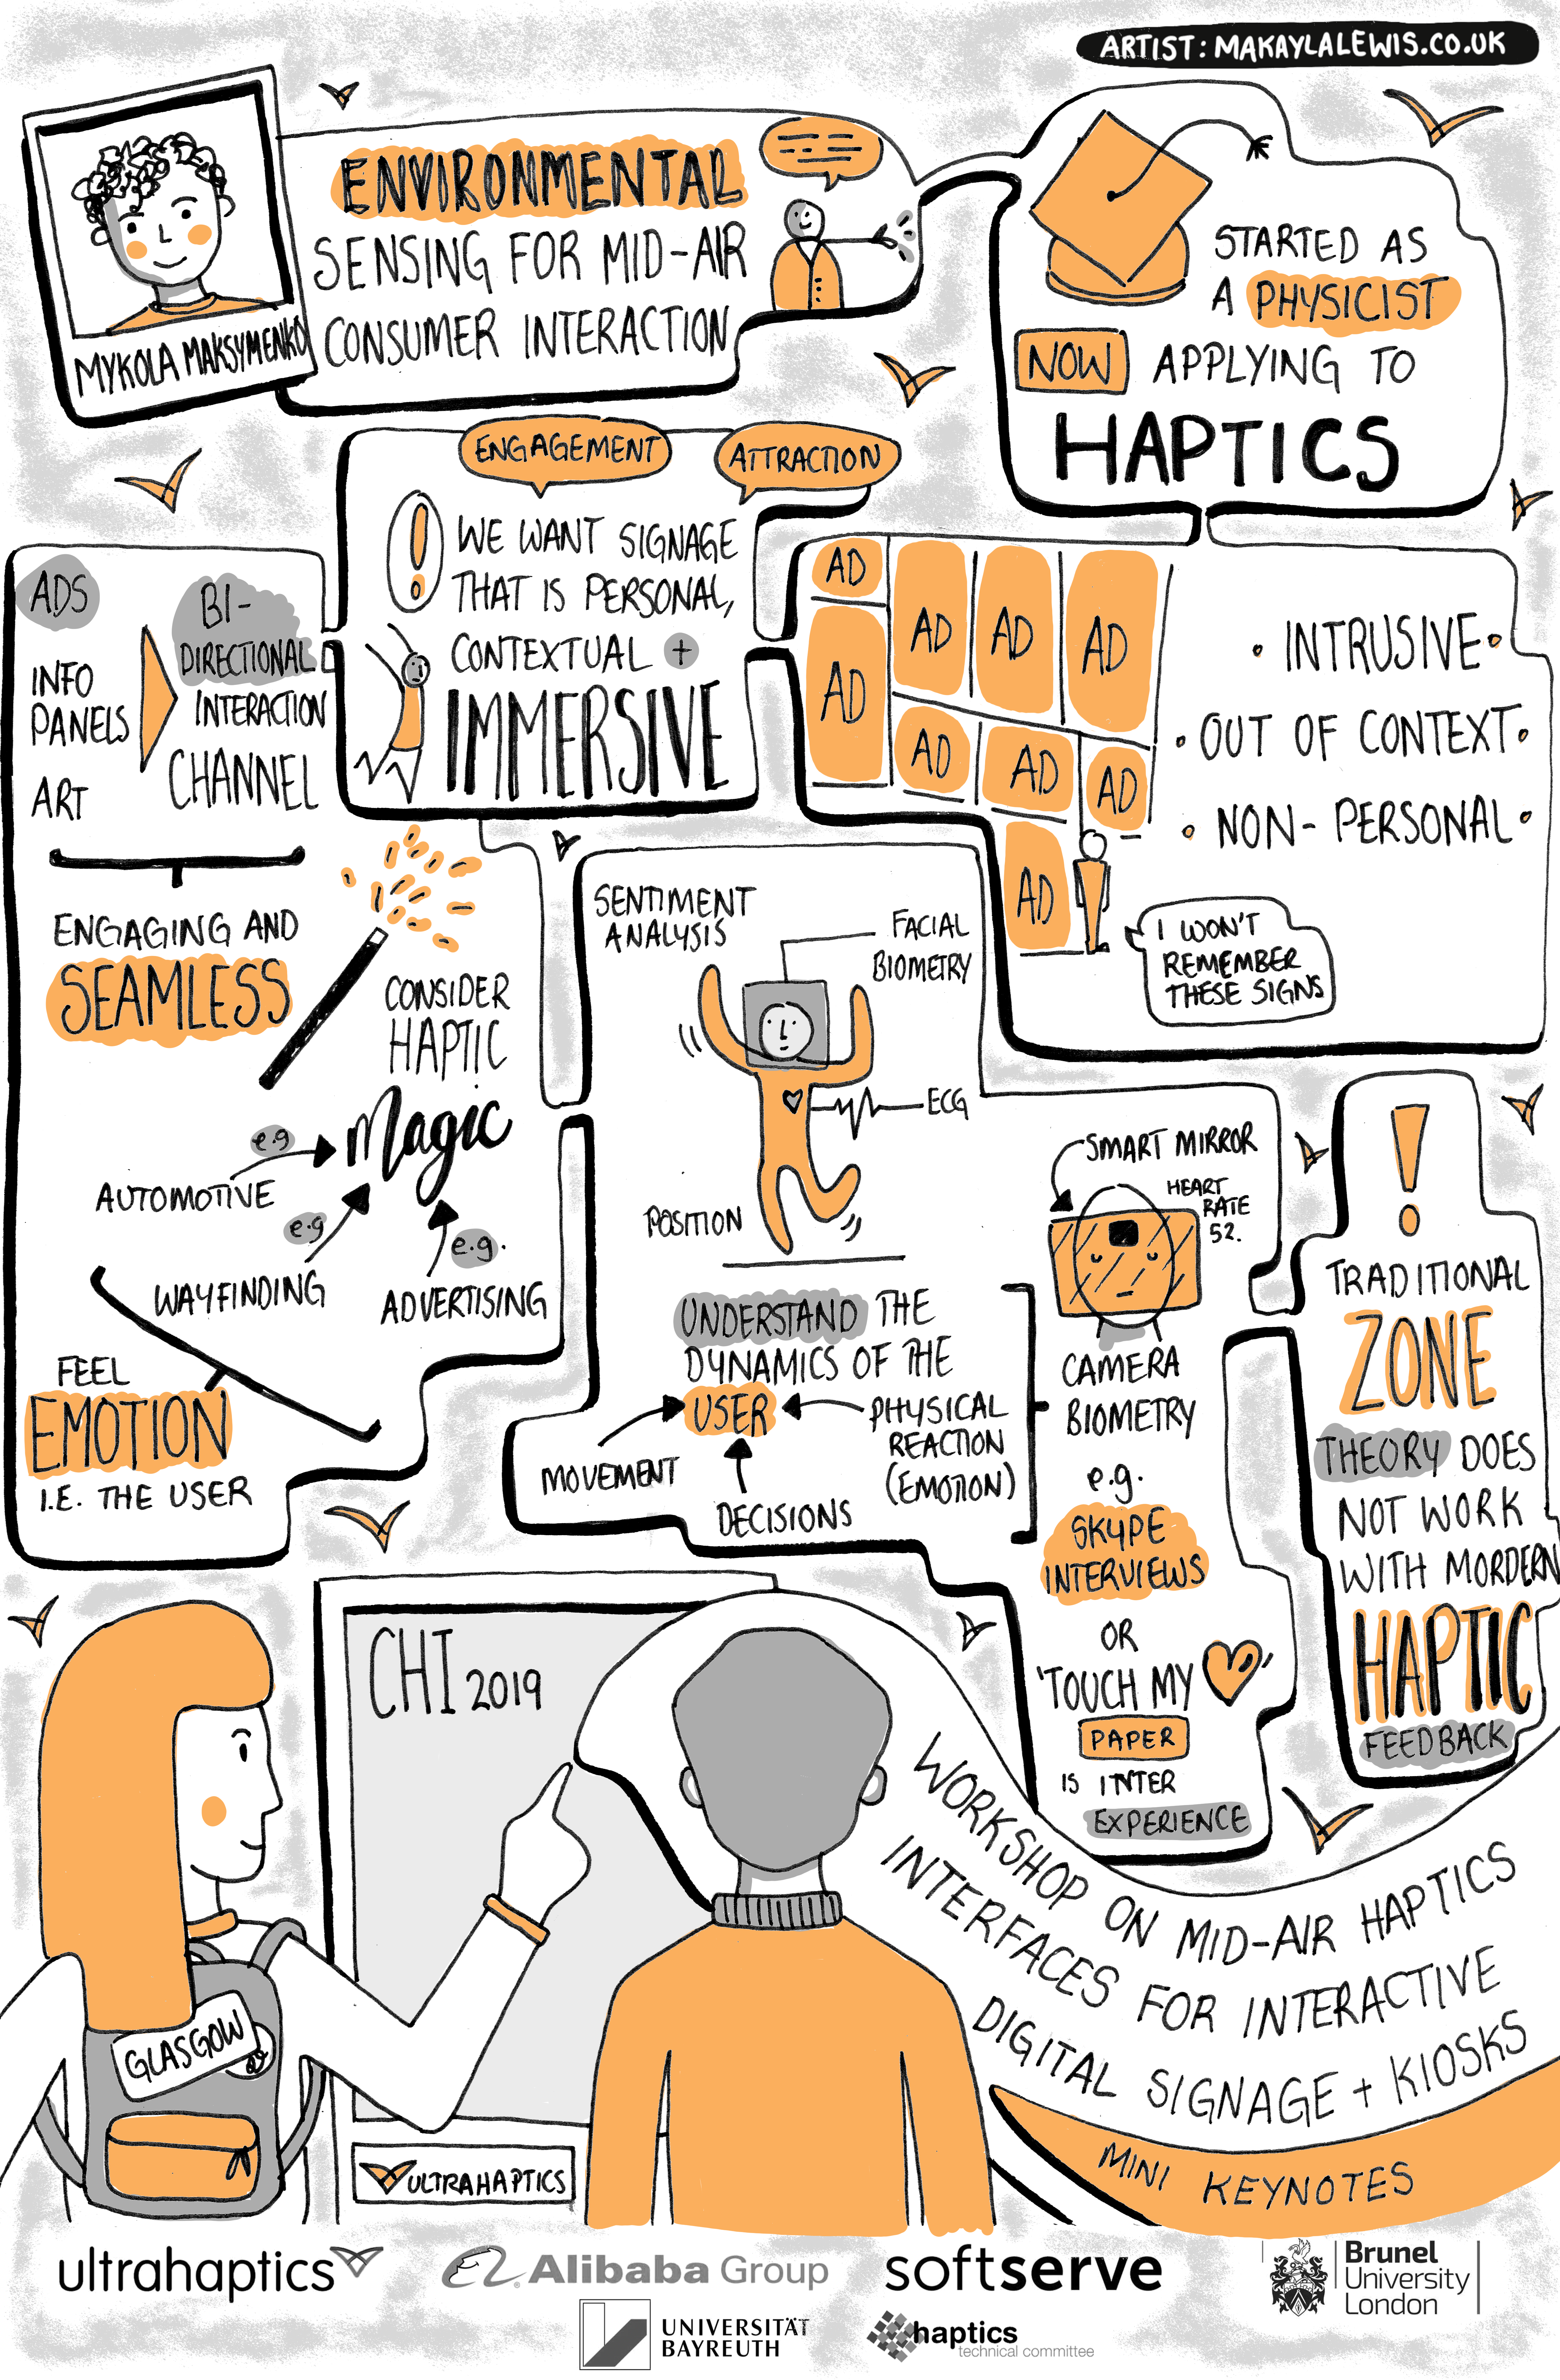 Sketchnotes from CHI 2019 Workshop on Mid-Air Haptics Interfaces for Interactive Digital Signage and Kiosks